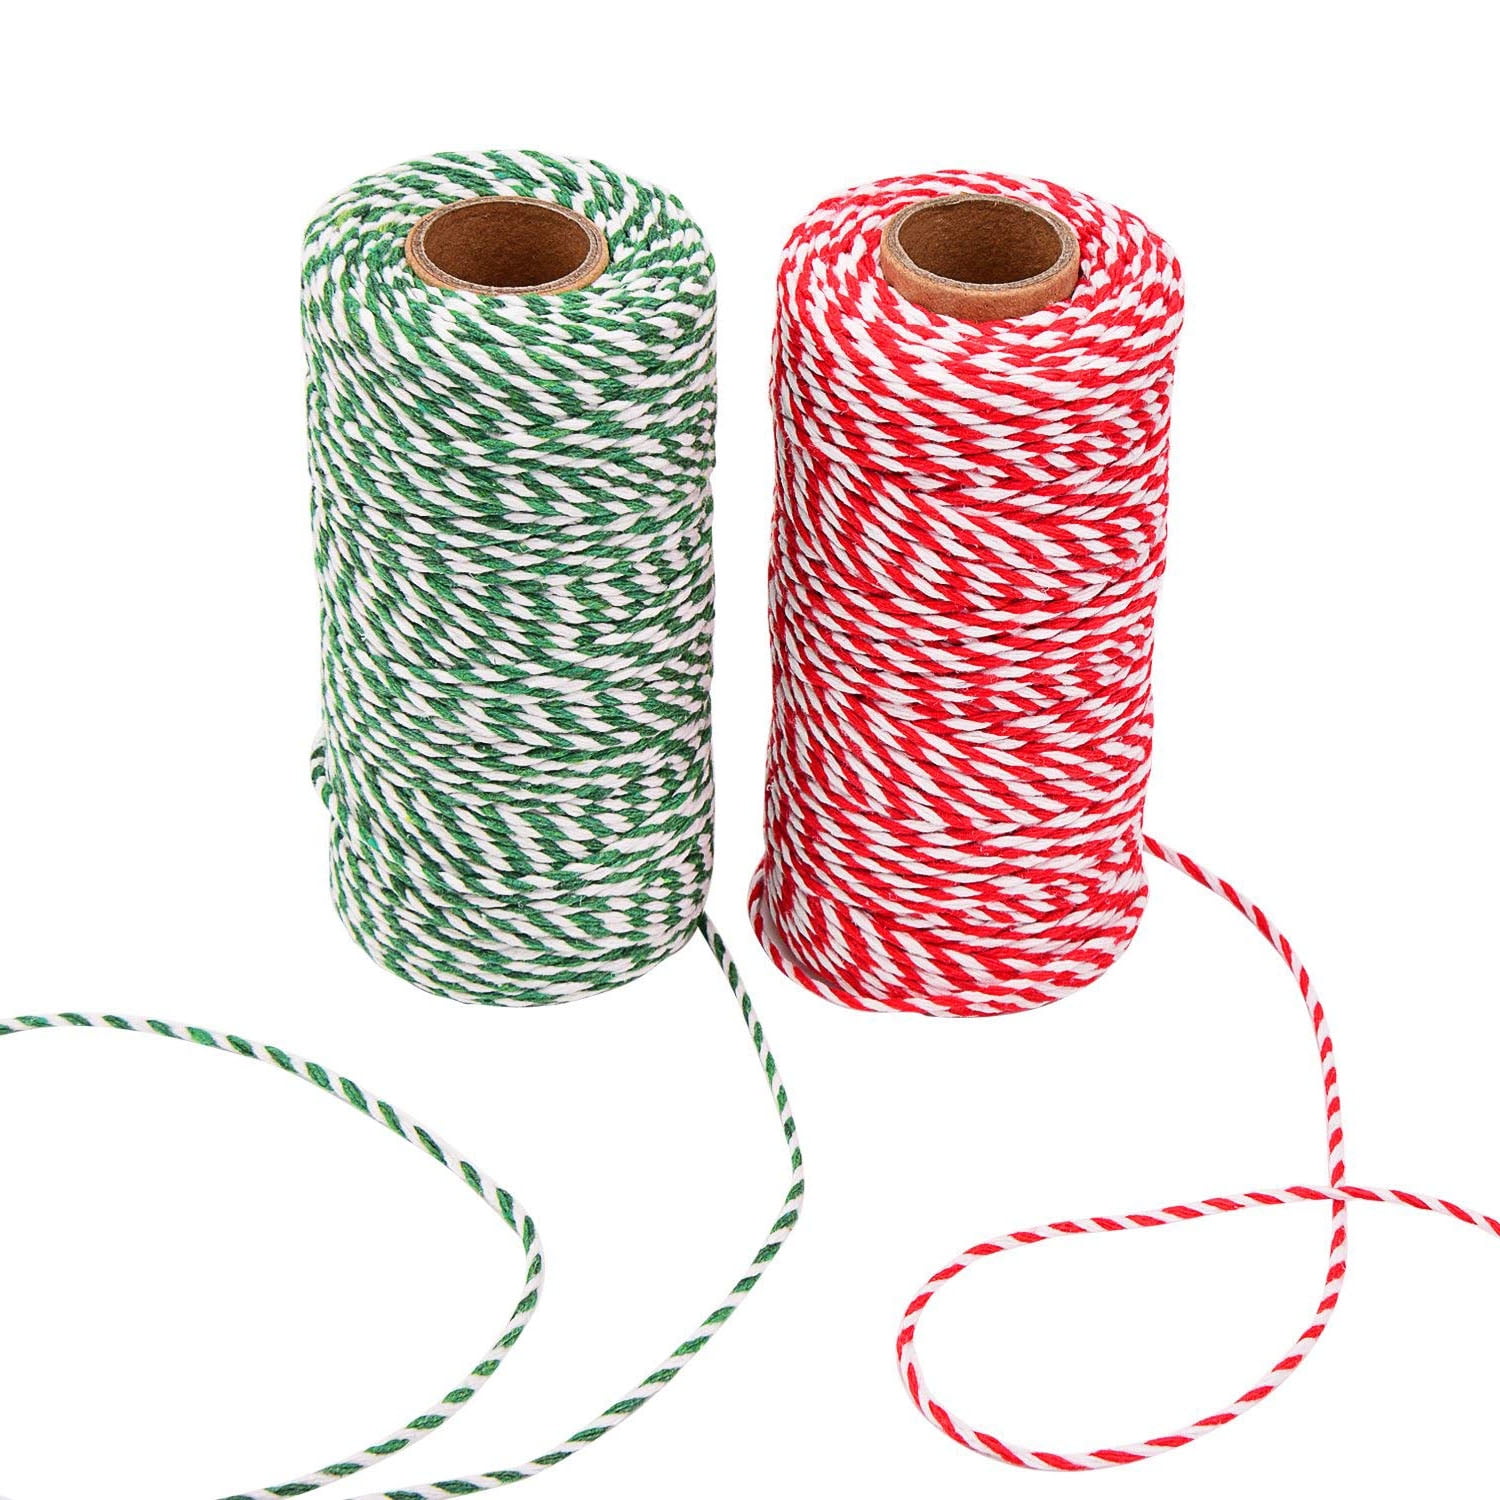 Red and White Baker Twine 656 Feet Cotton String Cords for Christmas Gits Wrapping Crafts Making Party Supplies